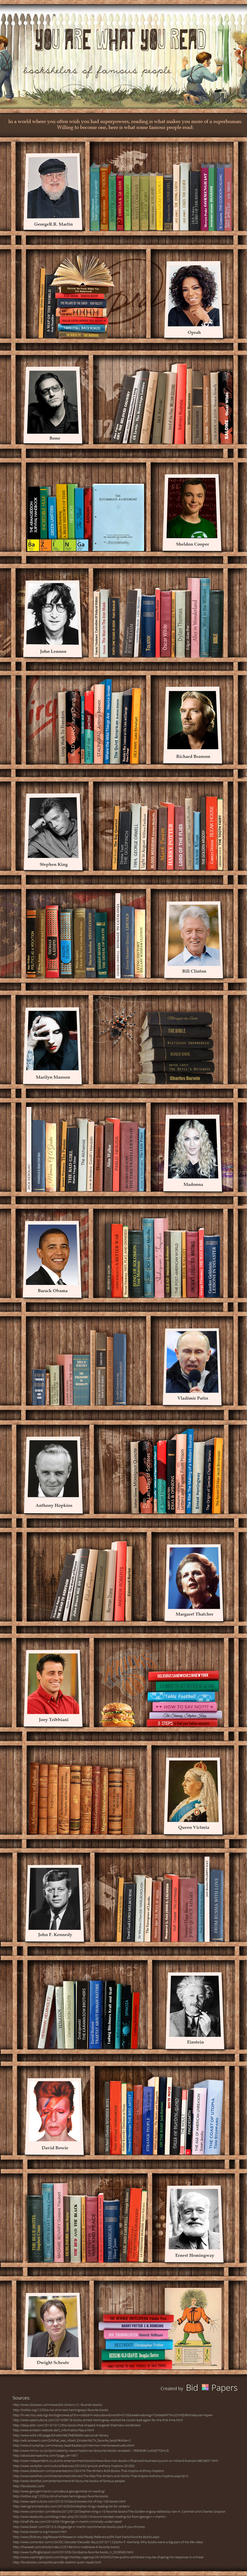 You Are What You Read: Bookshelves of Famous People